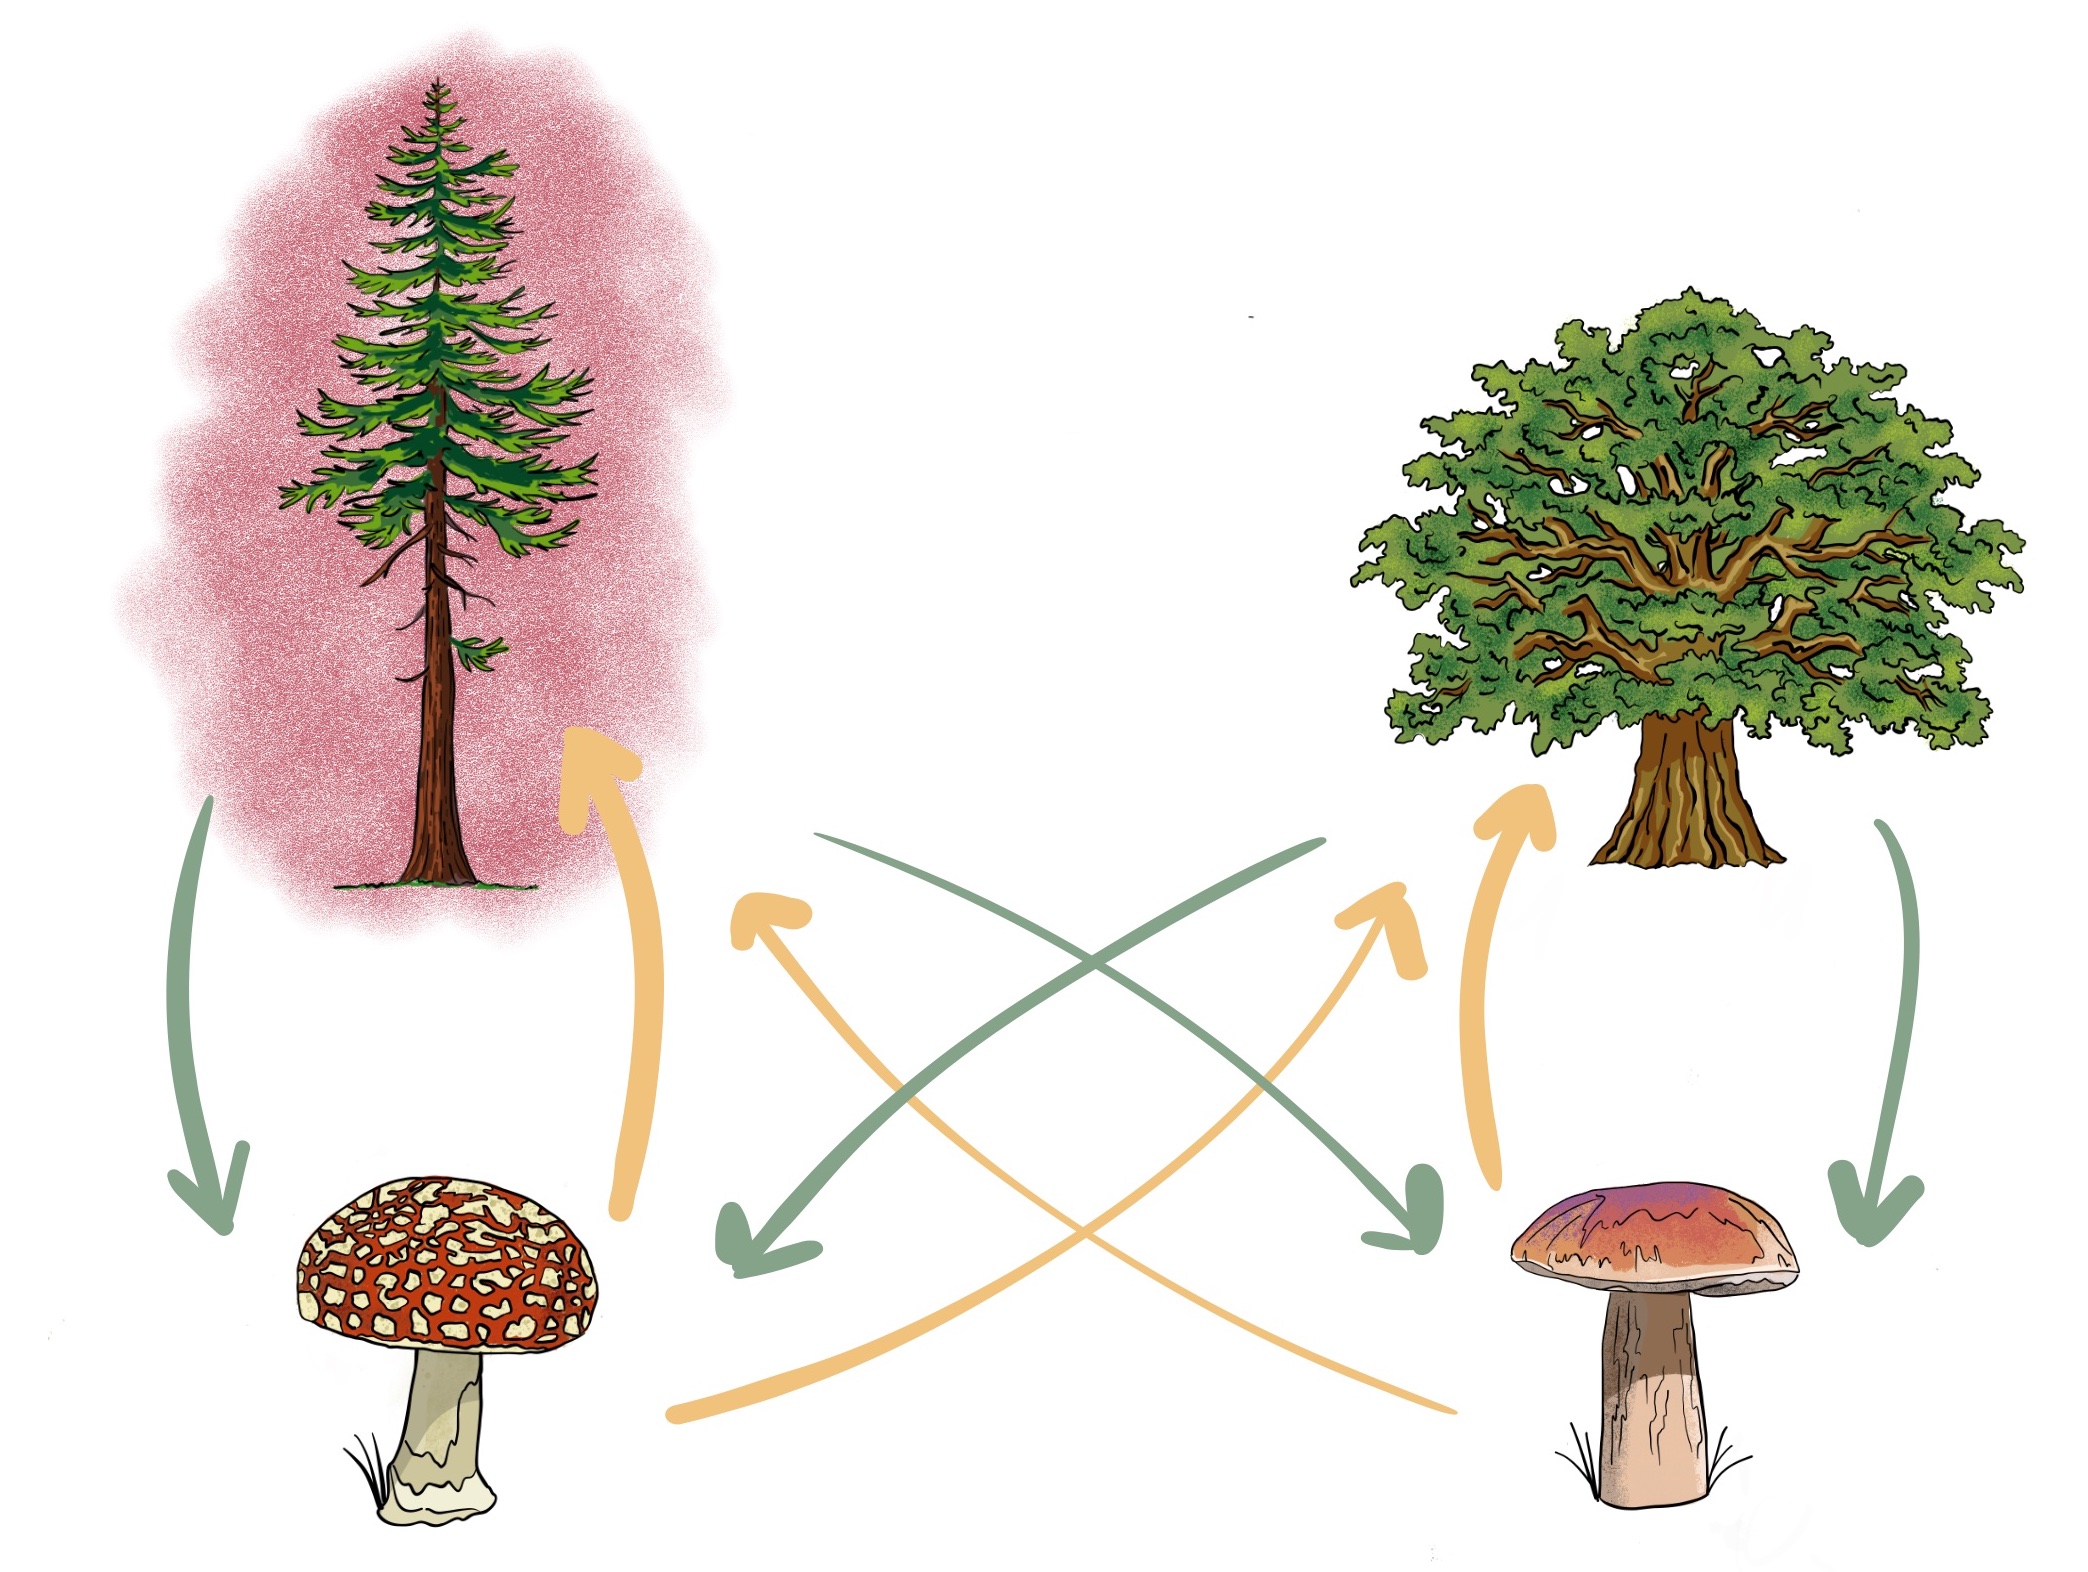 A sick tree connected to its neighbor via fungal networks